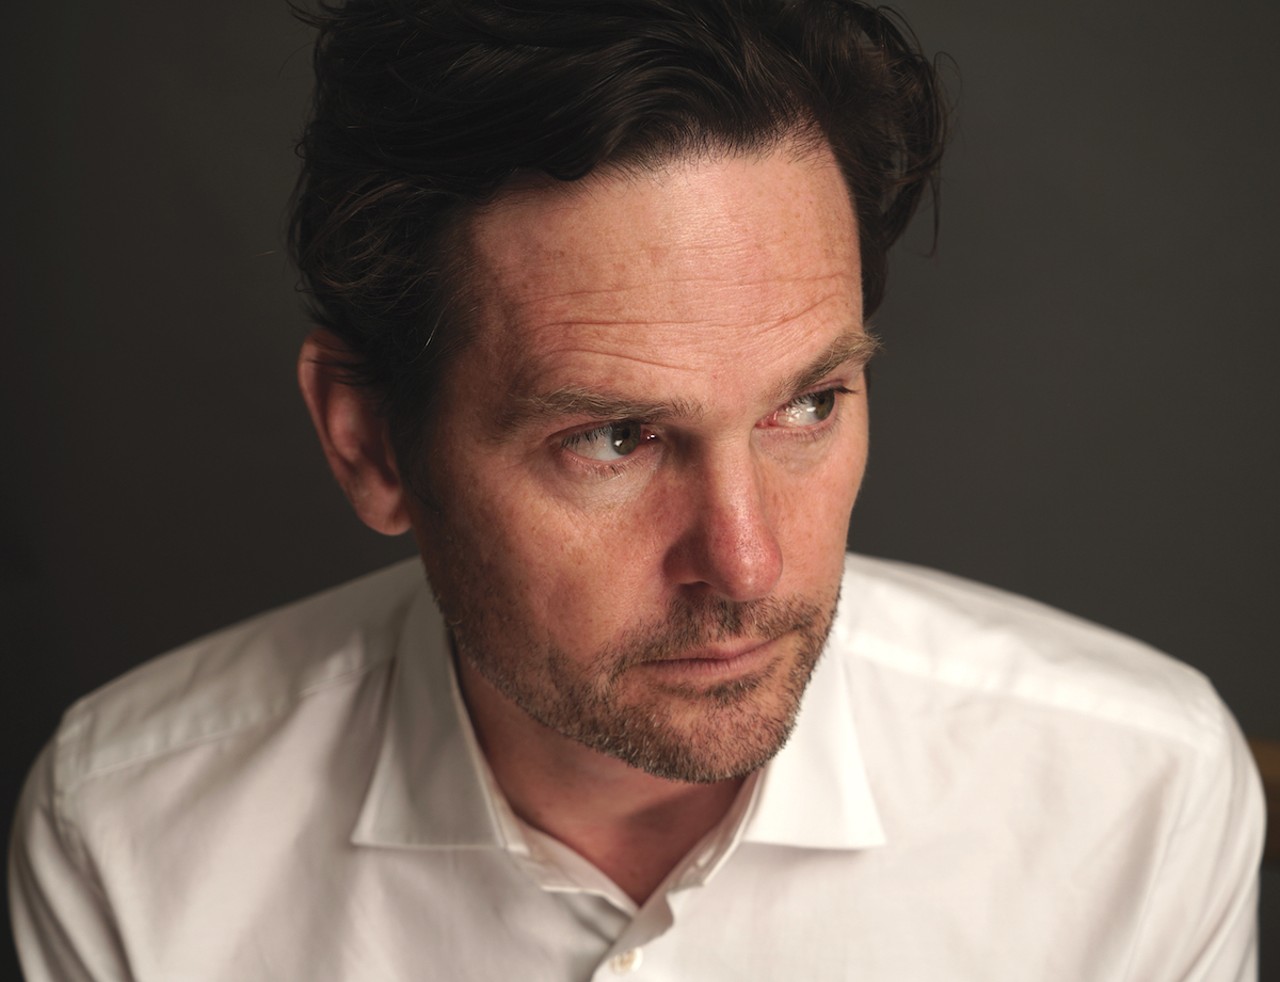 Henry Thomas
After breaking into Hollywood in E.T. The Extra-Terrestrial and starring in a few more films in his youth, actor Henry Thomas returned to his native SA. He even graduated from East Central HS before continuing his acting career.
Photo courtesy of Rare Bird Books